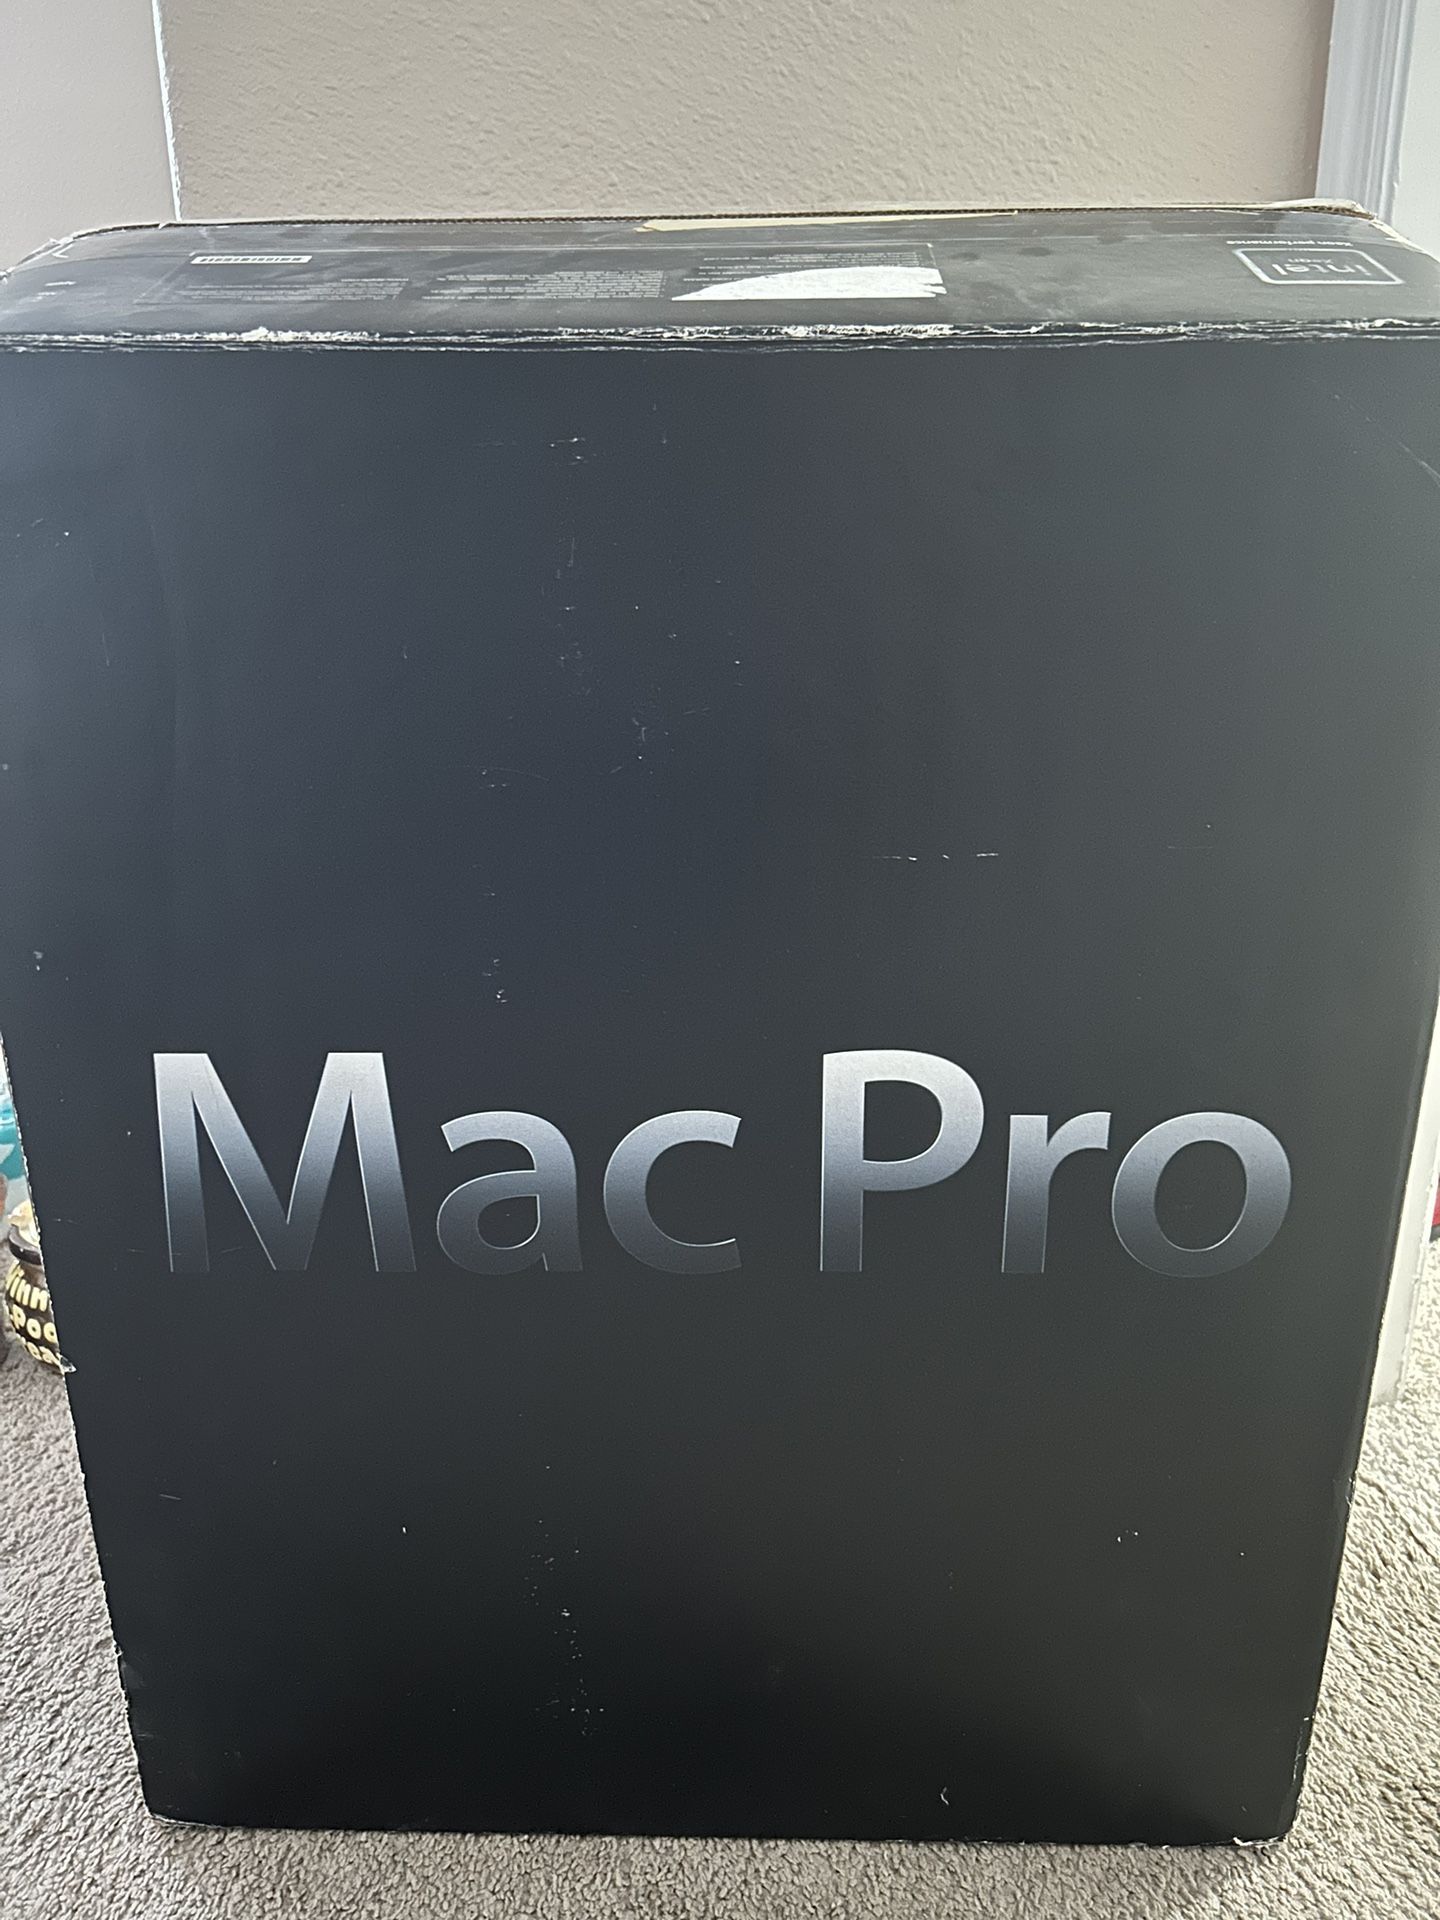 Apple Mac Pro 4.1 2009 with Original Box - Running Monterey - 16 GB RAM  - or trade for videogames